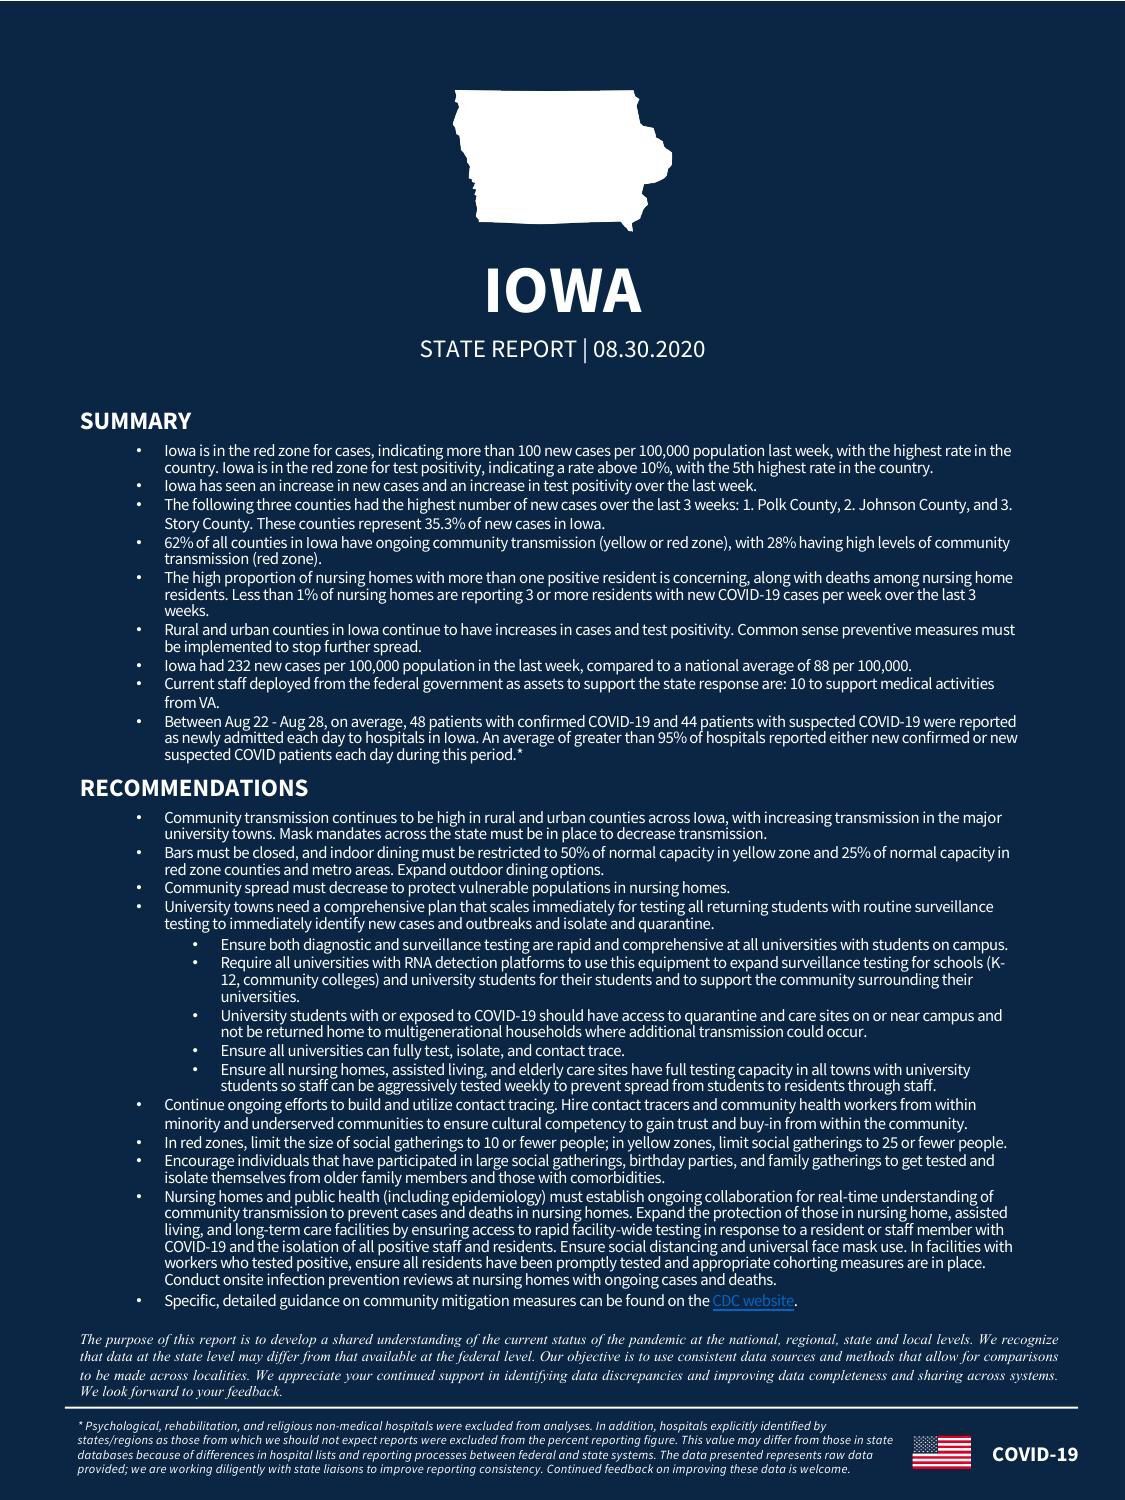 Read it for yourself: White House report's COVID-19 recommendations for Iowa